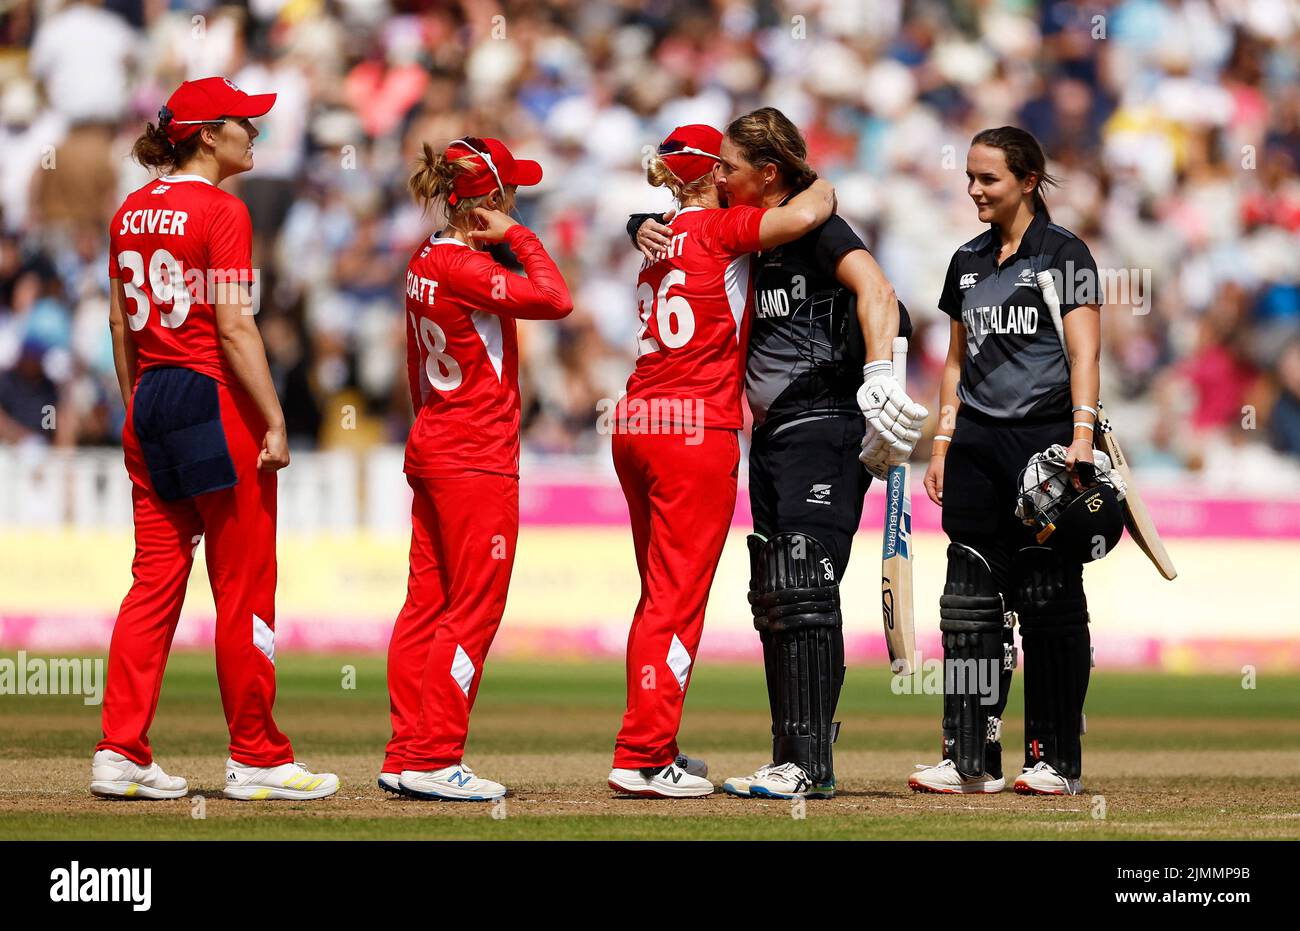 Commonwealth Games - Women's Cricket T20 - England v New Zealand - Bronze Medal - Edgbaston Stadium, Britain - August 7, 2022 New Zealand's Sophie Devine and England's Katherine Brunt after the match REUTERS/Jason Cairnduff Stock Photo